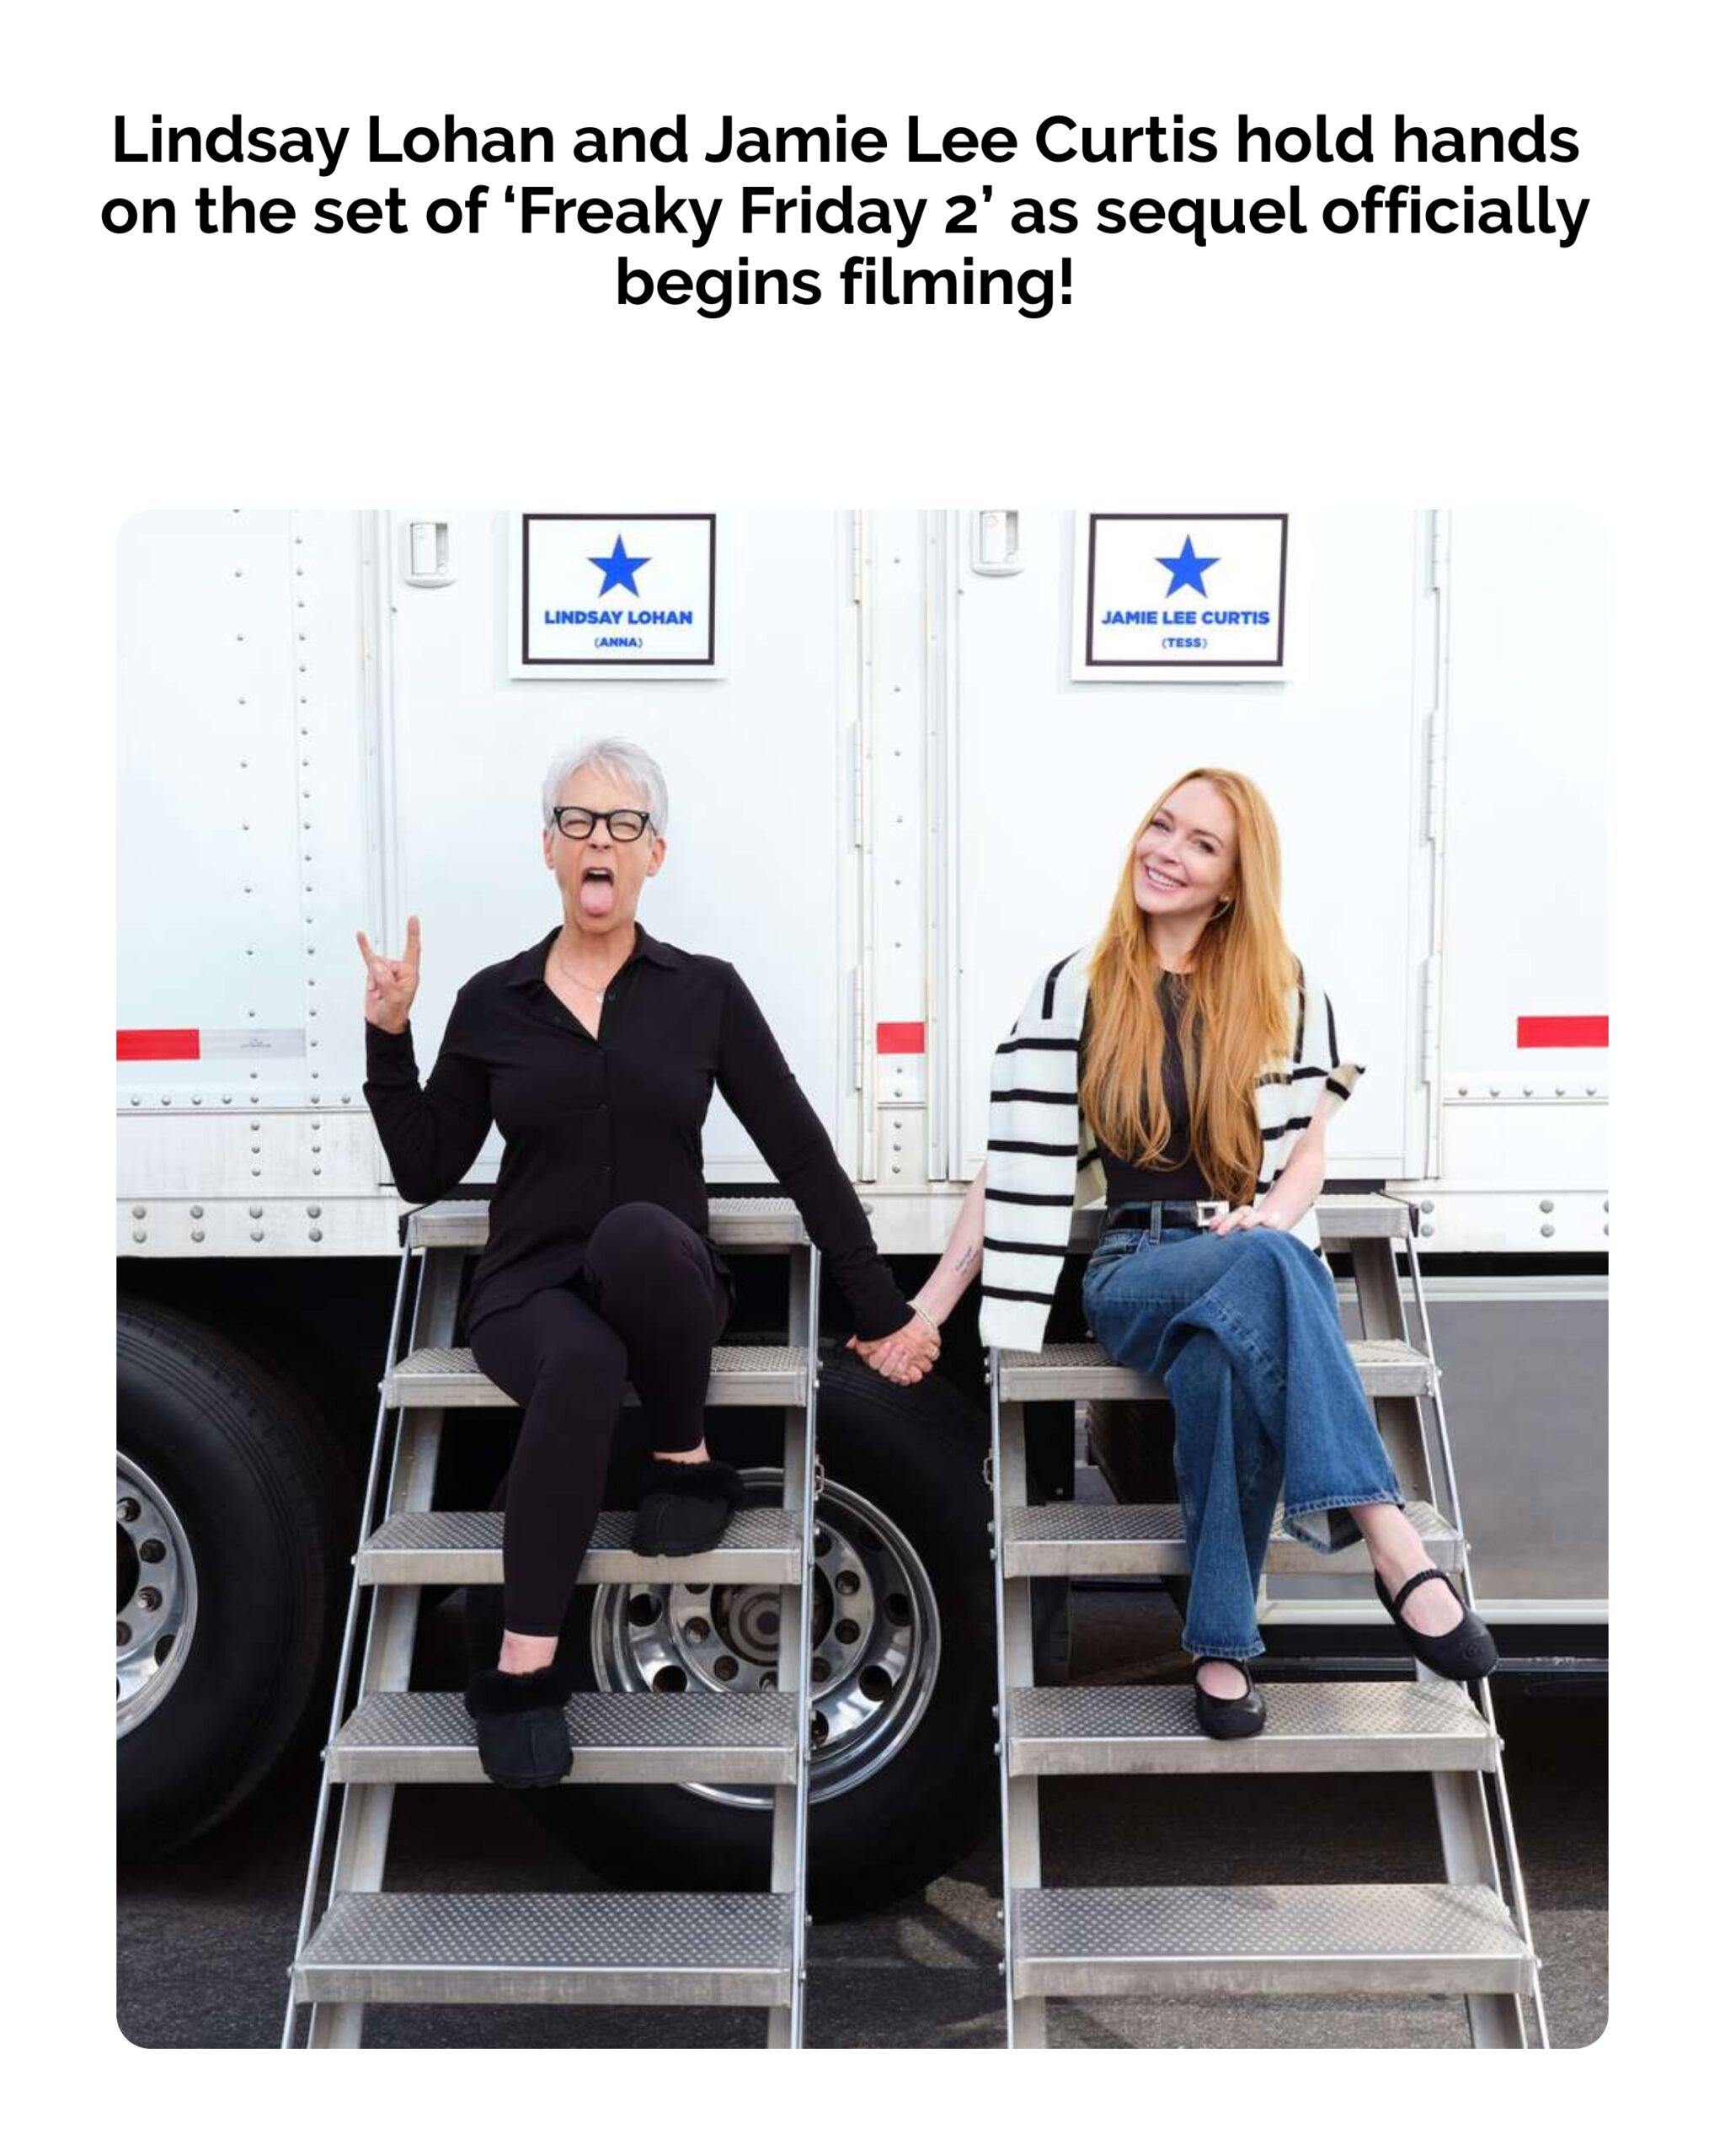 Lindsay Lohan and Jamie Lee Curtis Hold Hands on ‘Freaky Friday 2’ Set as Sequel Begins Filming